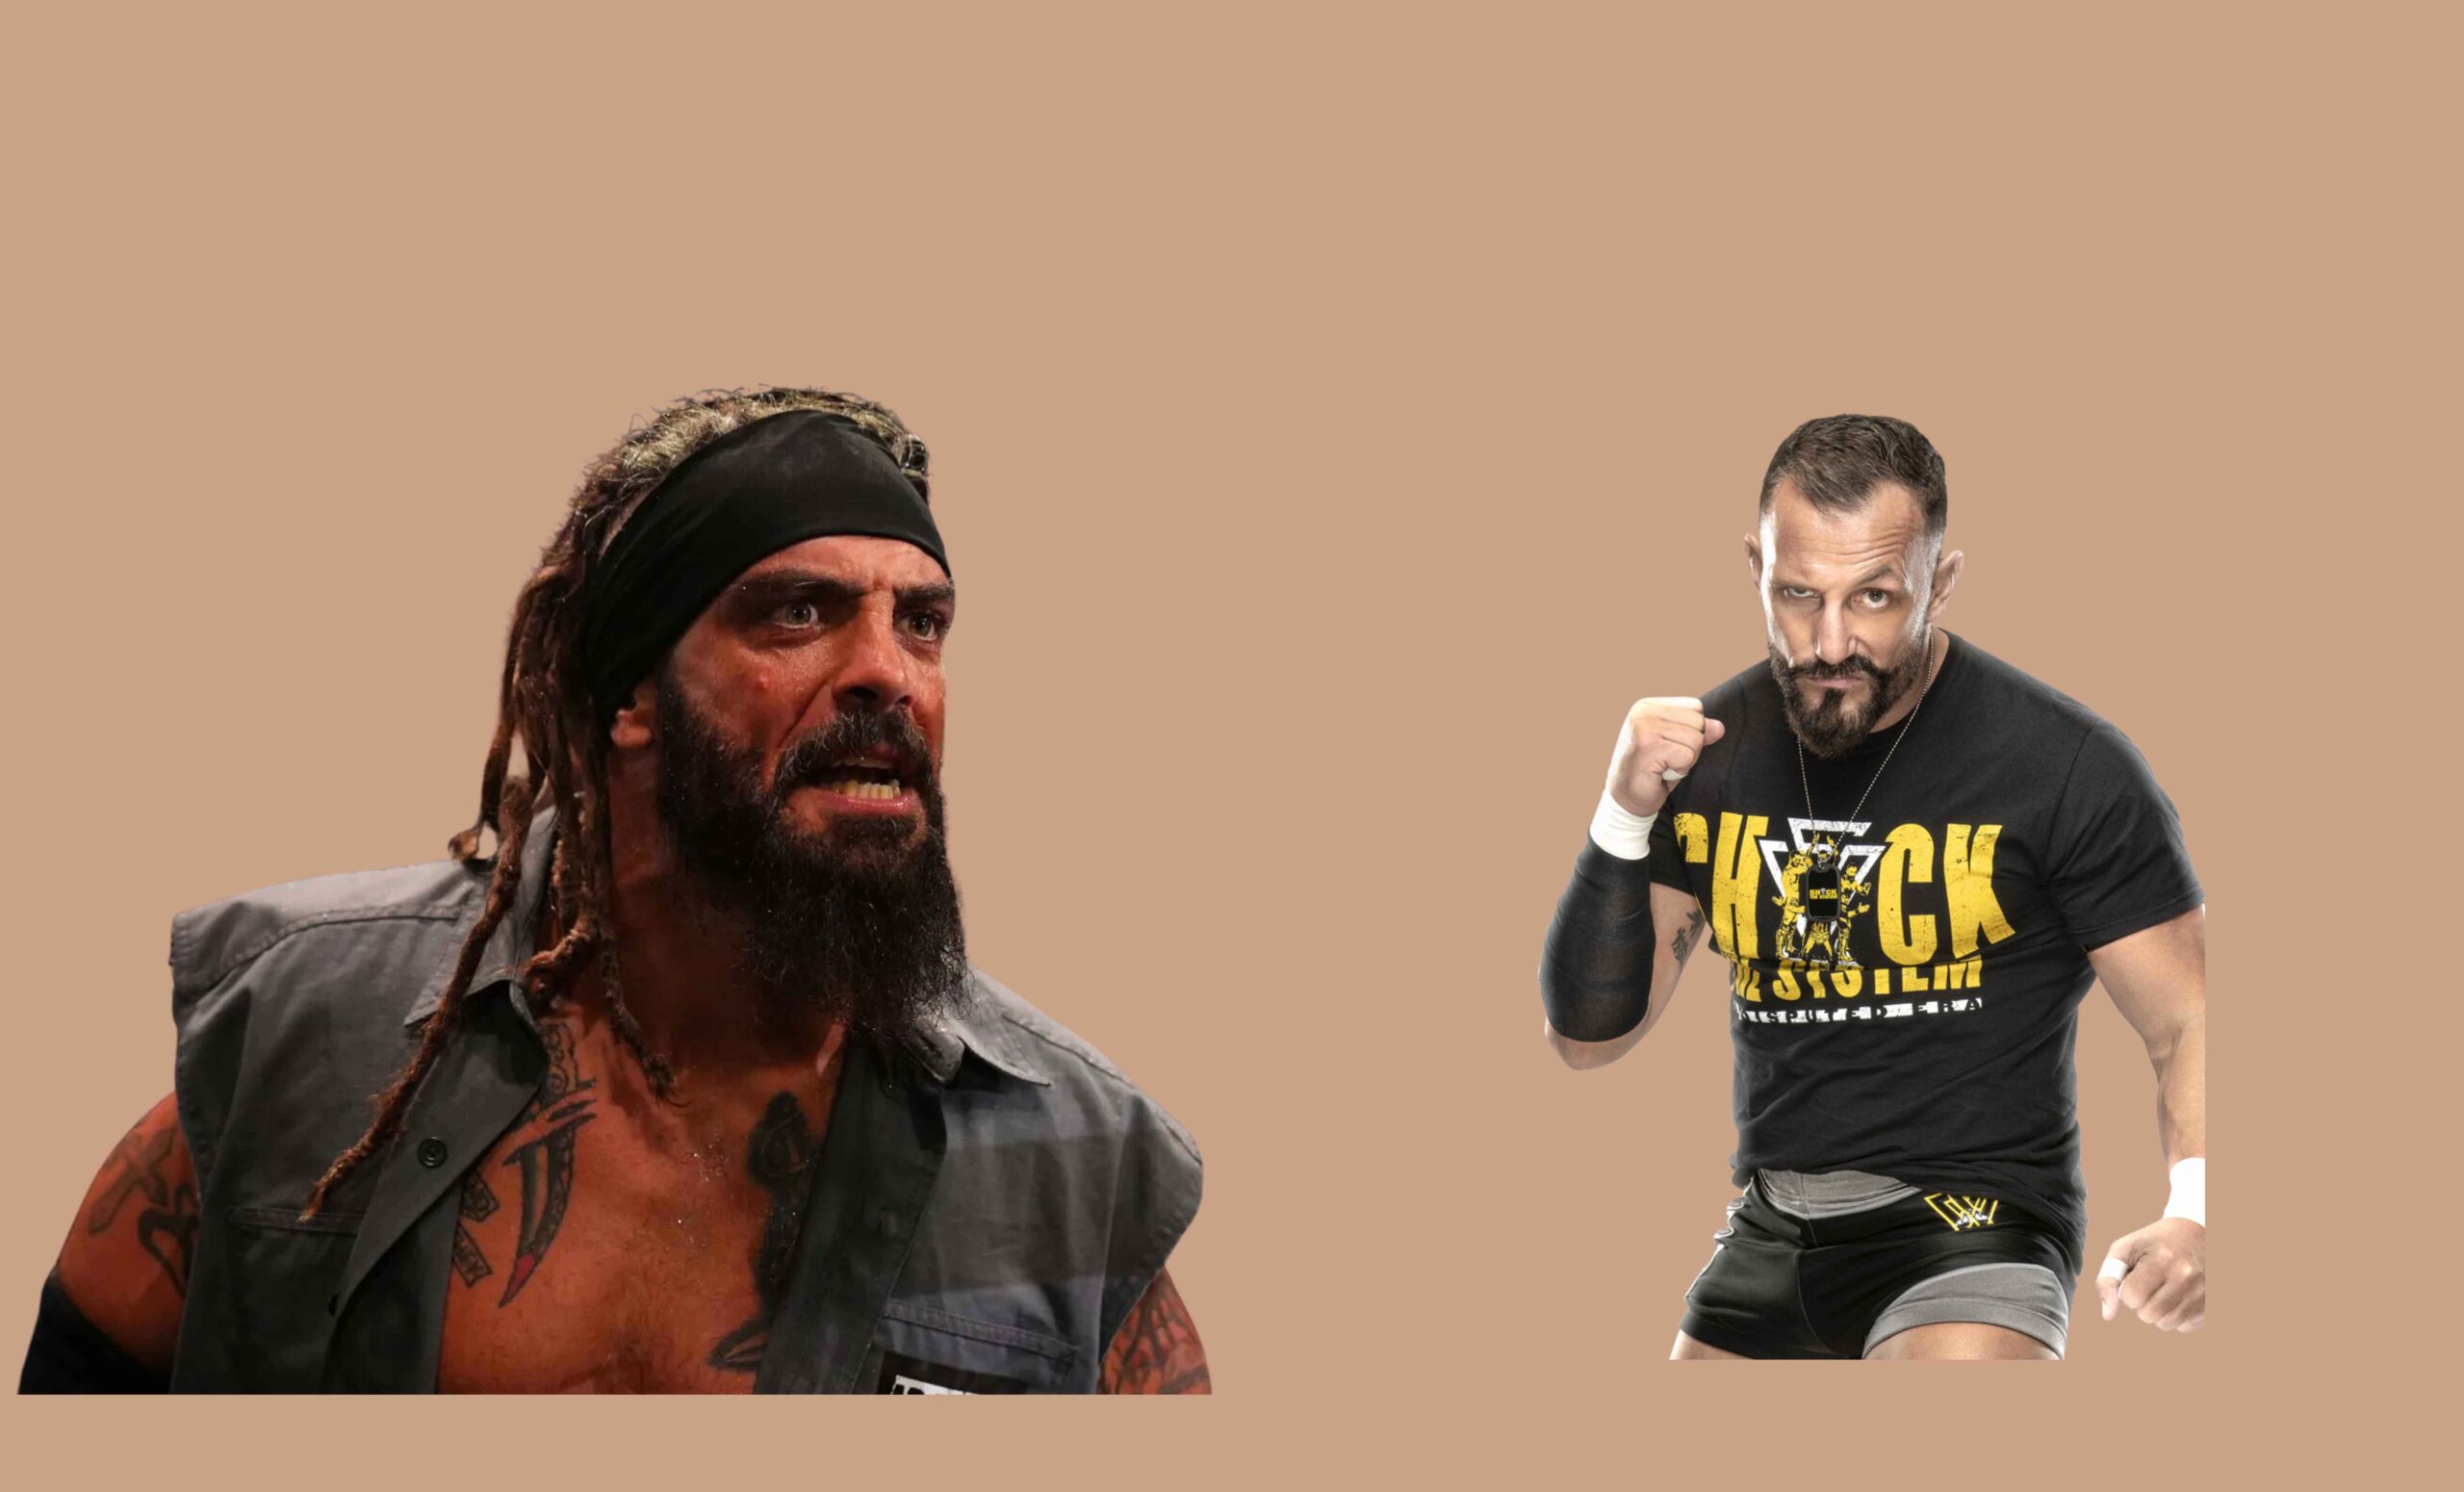 Bobby Fish Pays Tribute to Wrestling Briscoes: A Look Back at Their Legendary Matches